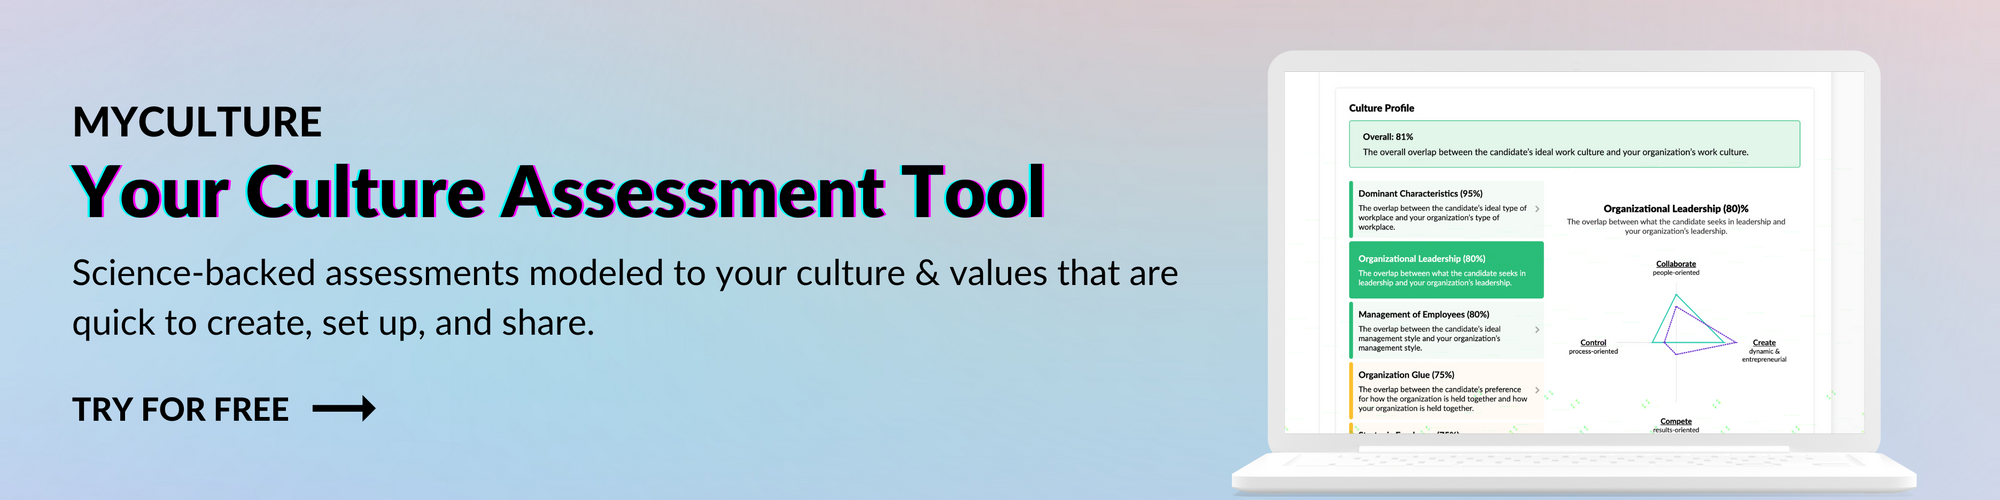 MYCULTURE - Culture Assessment Tool